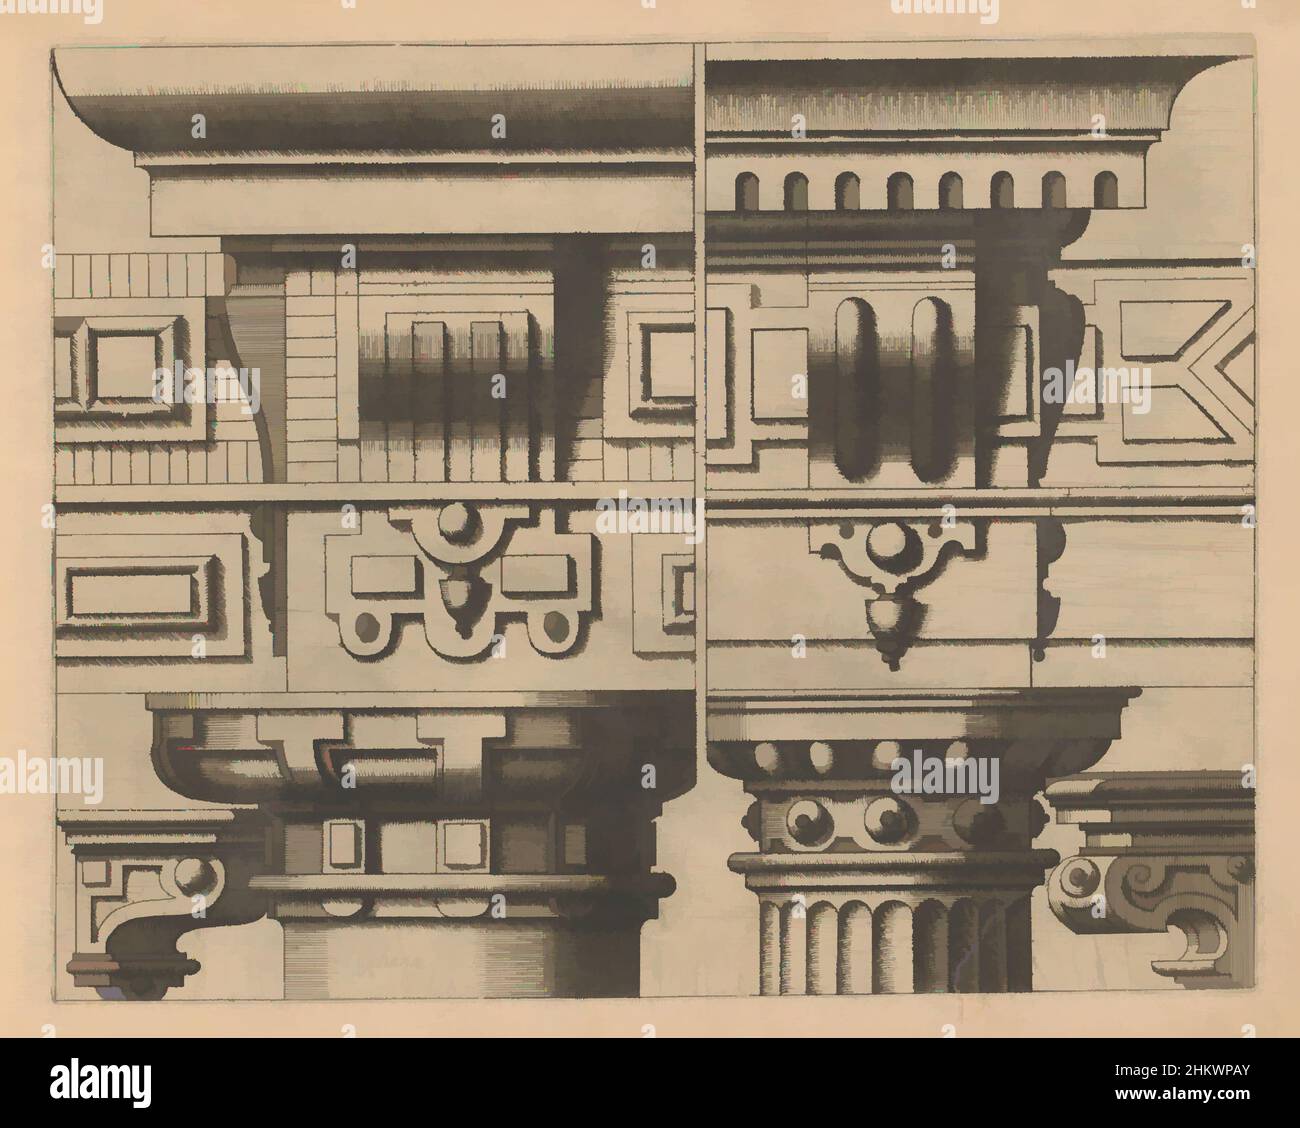 Art inspired by Two Tuscan entablatures and two consoles, Architectura de Oorden Tusschana (series title), Two entablatures in the Tuscan Order. The friezes have triglyphs and metopes. The architrave in the right design is articulated. A console at the bottom left and right. The print, Classic works modernized by Artotop with a splash of modernity. Shapes, color and value, eye-catching visual impact on art. Emotions through freedom of artworks in a contemporary way. A timeless message pursuing a wildly creative new direction. Artists turning to the digital medium and creating the Artotop NFT Stock Photo